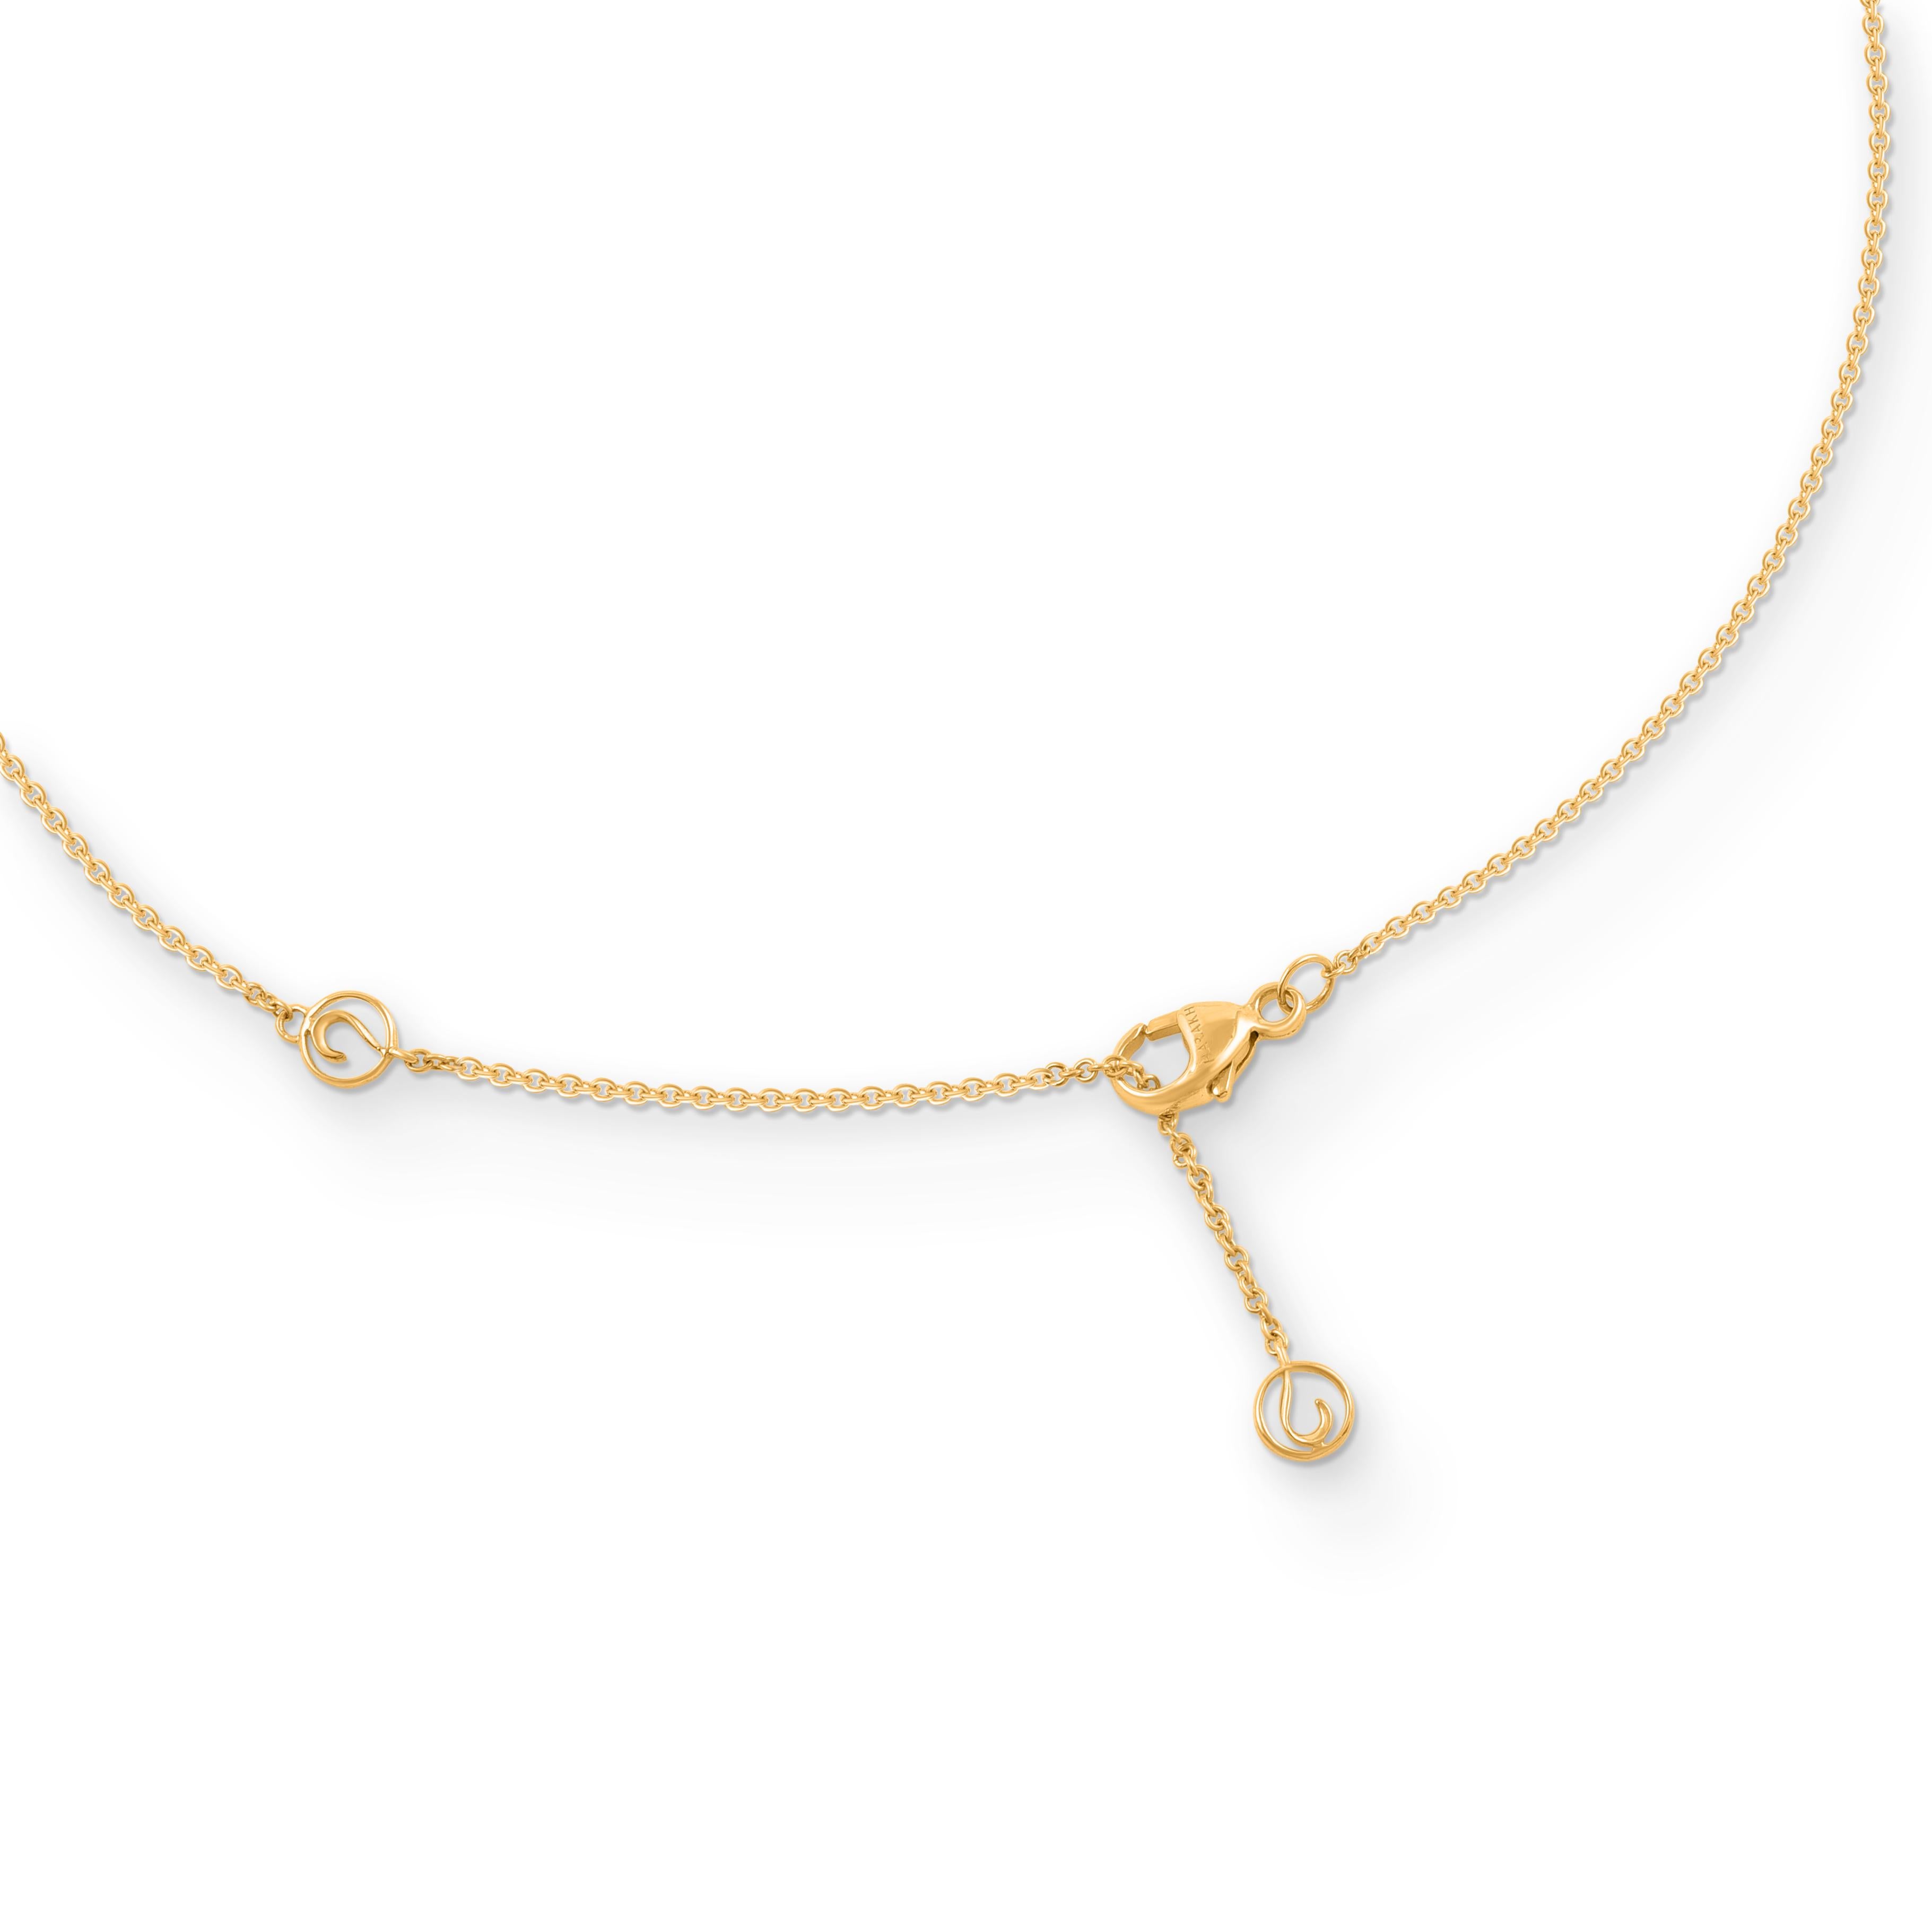 Round Cut Harakh Colorless Natural Diamond 1.40 Carat Station Necklace in 18 KT Gold For Sale